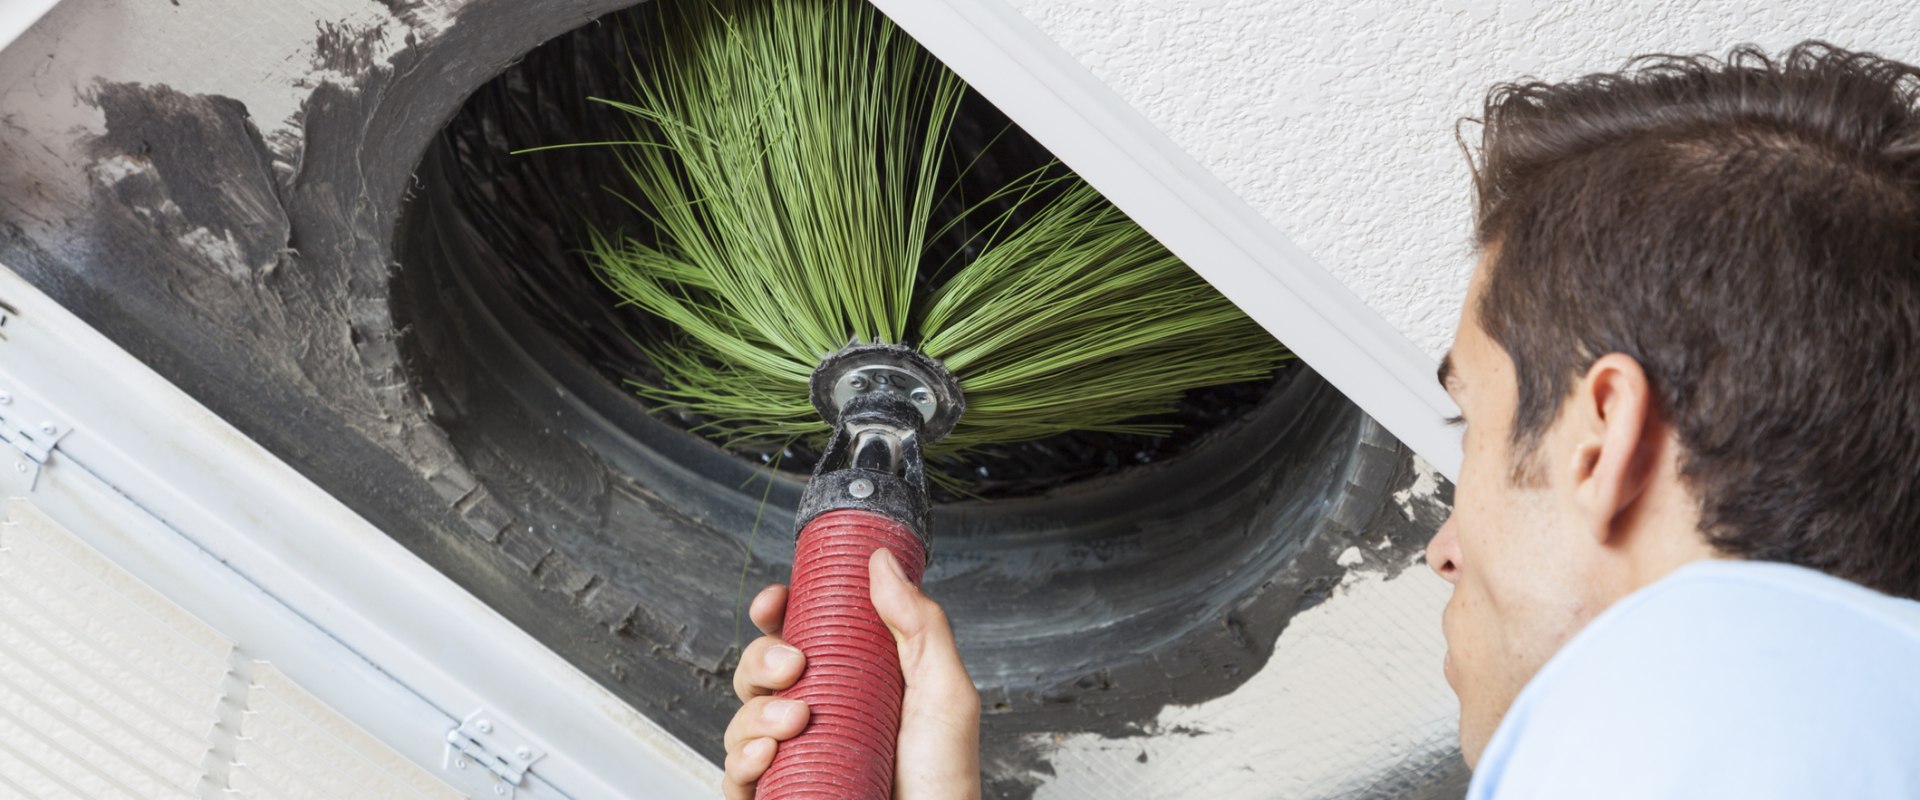 Do I Need to Be Present During Duct Cleaning Service? - An Expert's Perspective